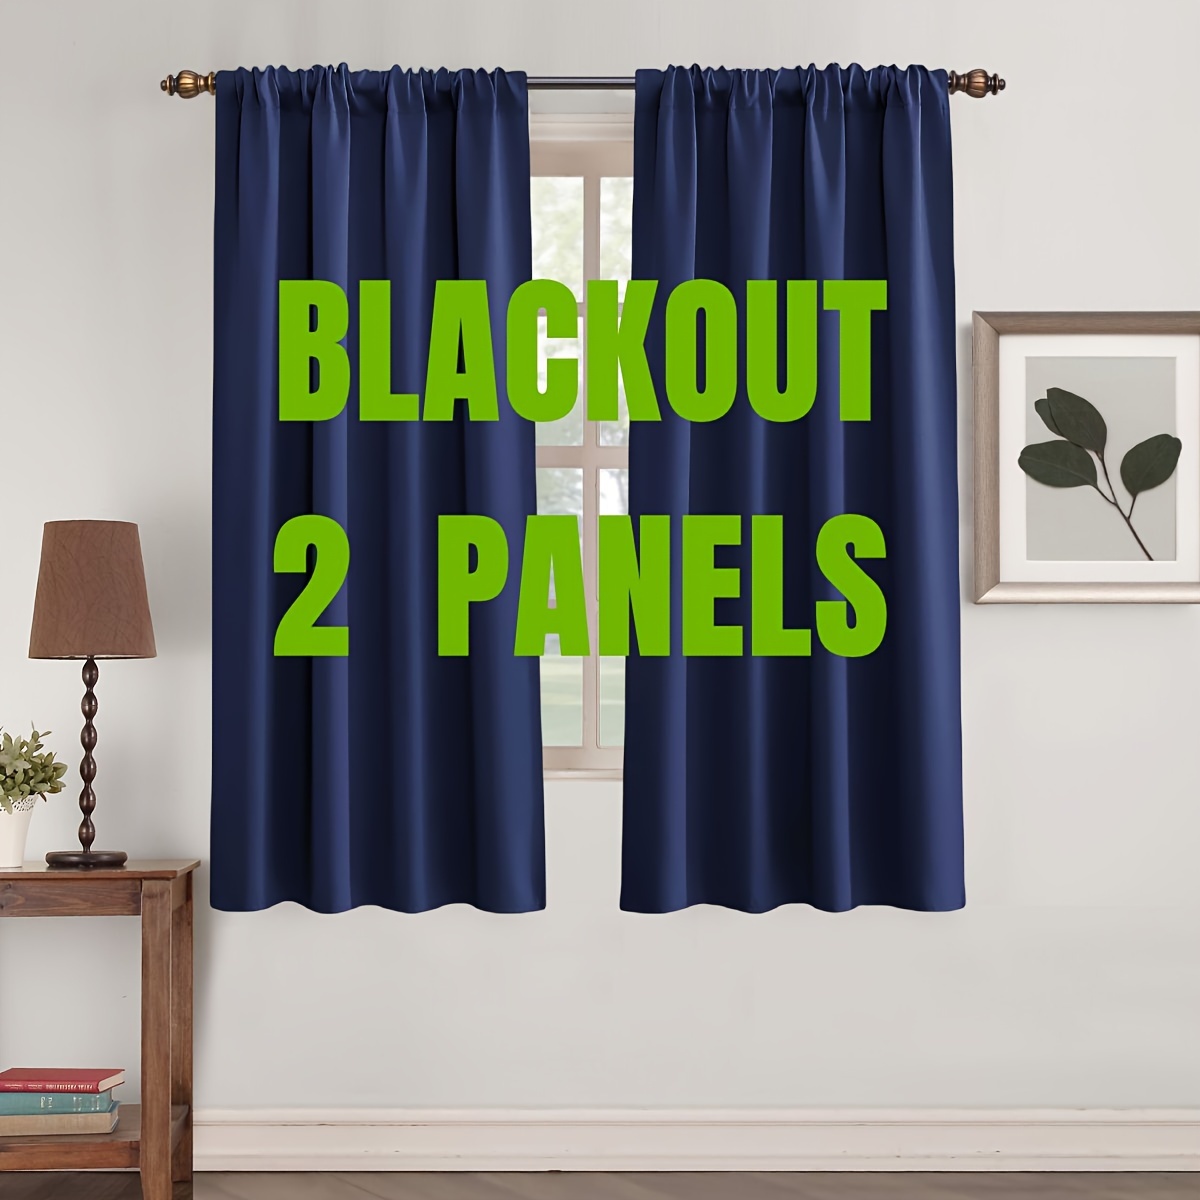 

2 Panels Blackout Curtains Room Insulation Darkening Noise Reduction Curtains Rod Pocket Curtains For Bedroom Living Room Office Home Decor